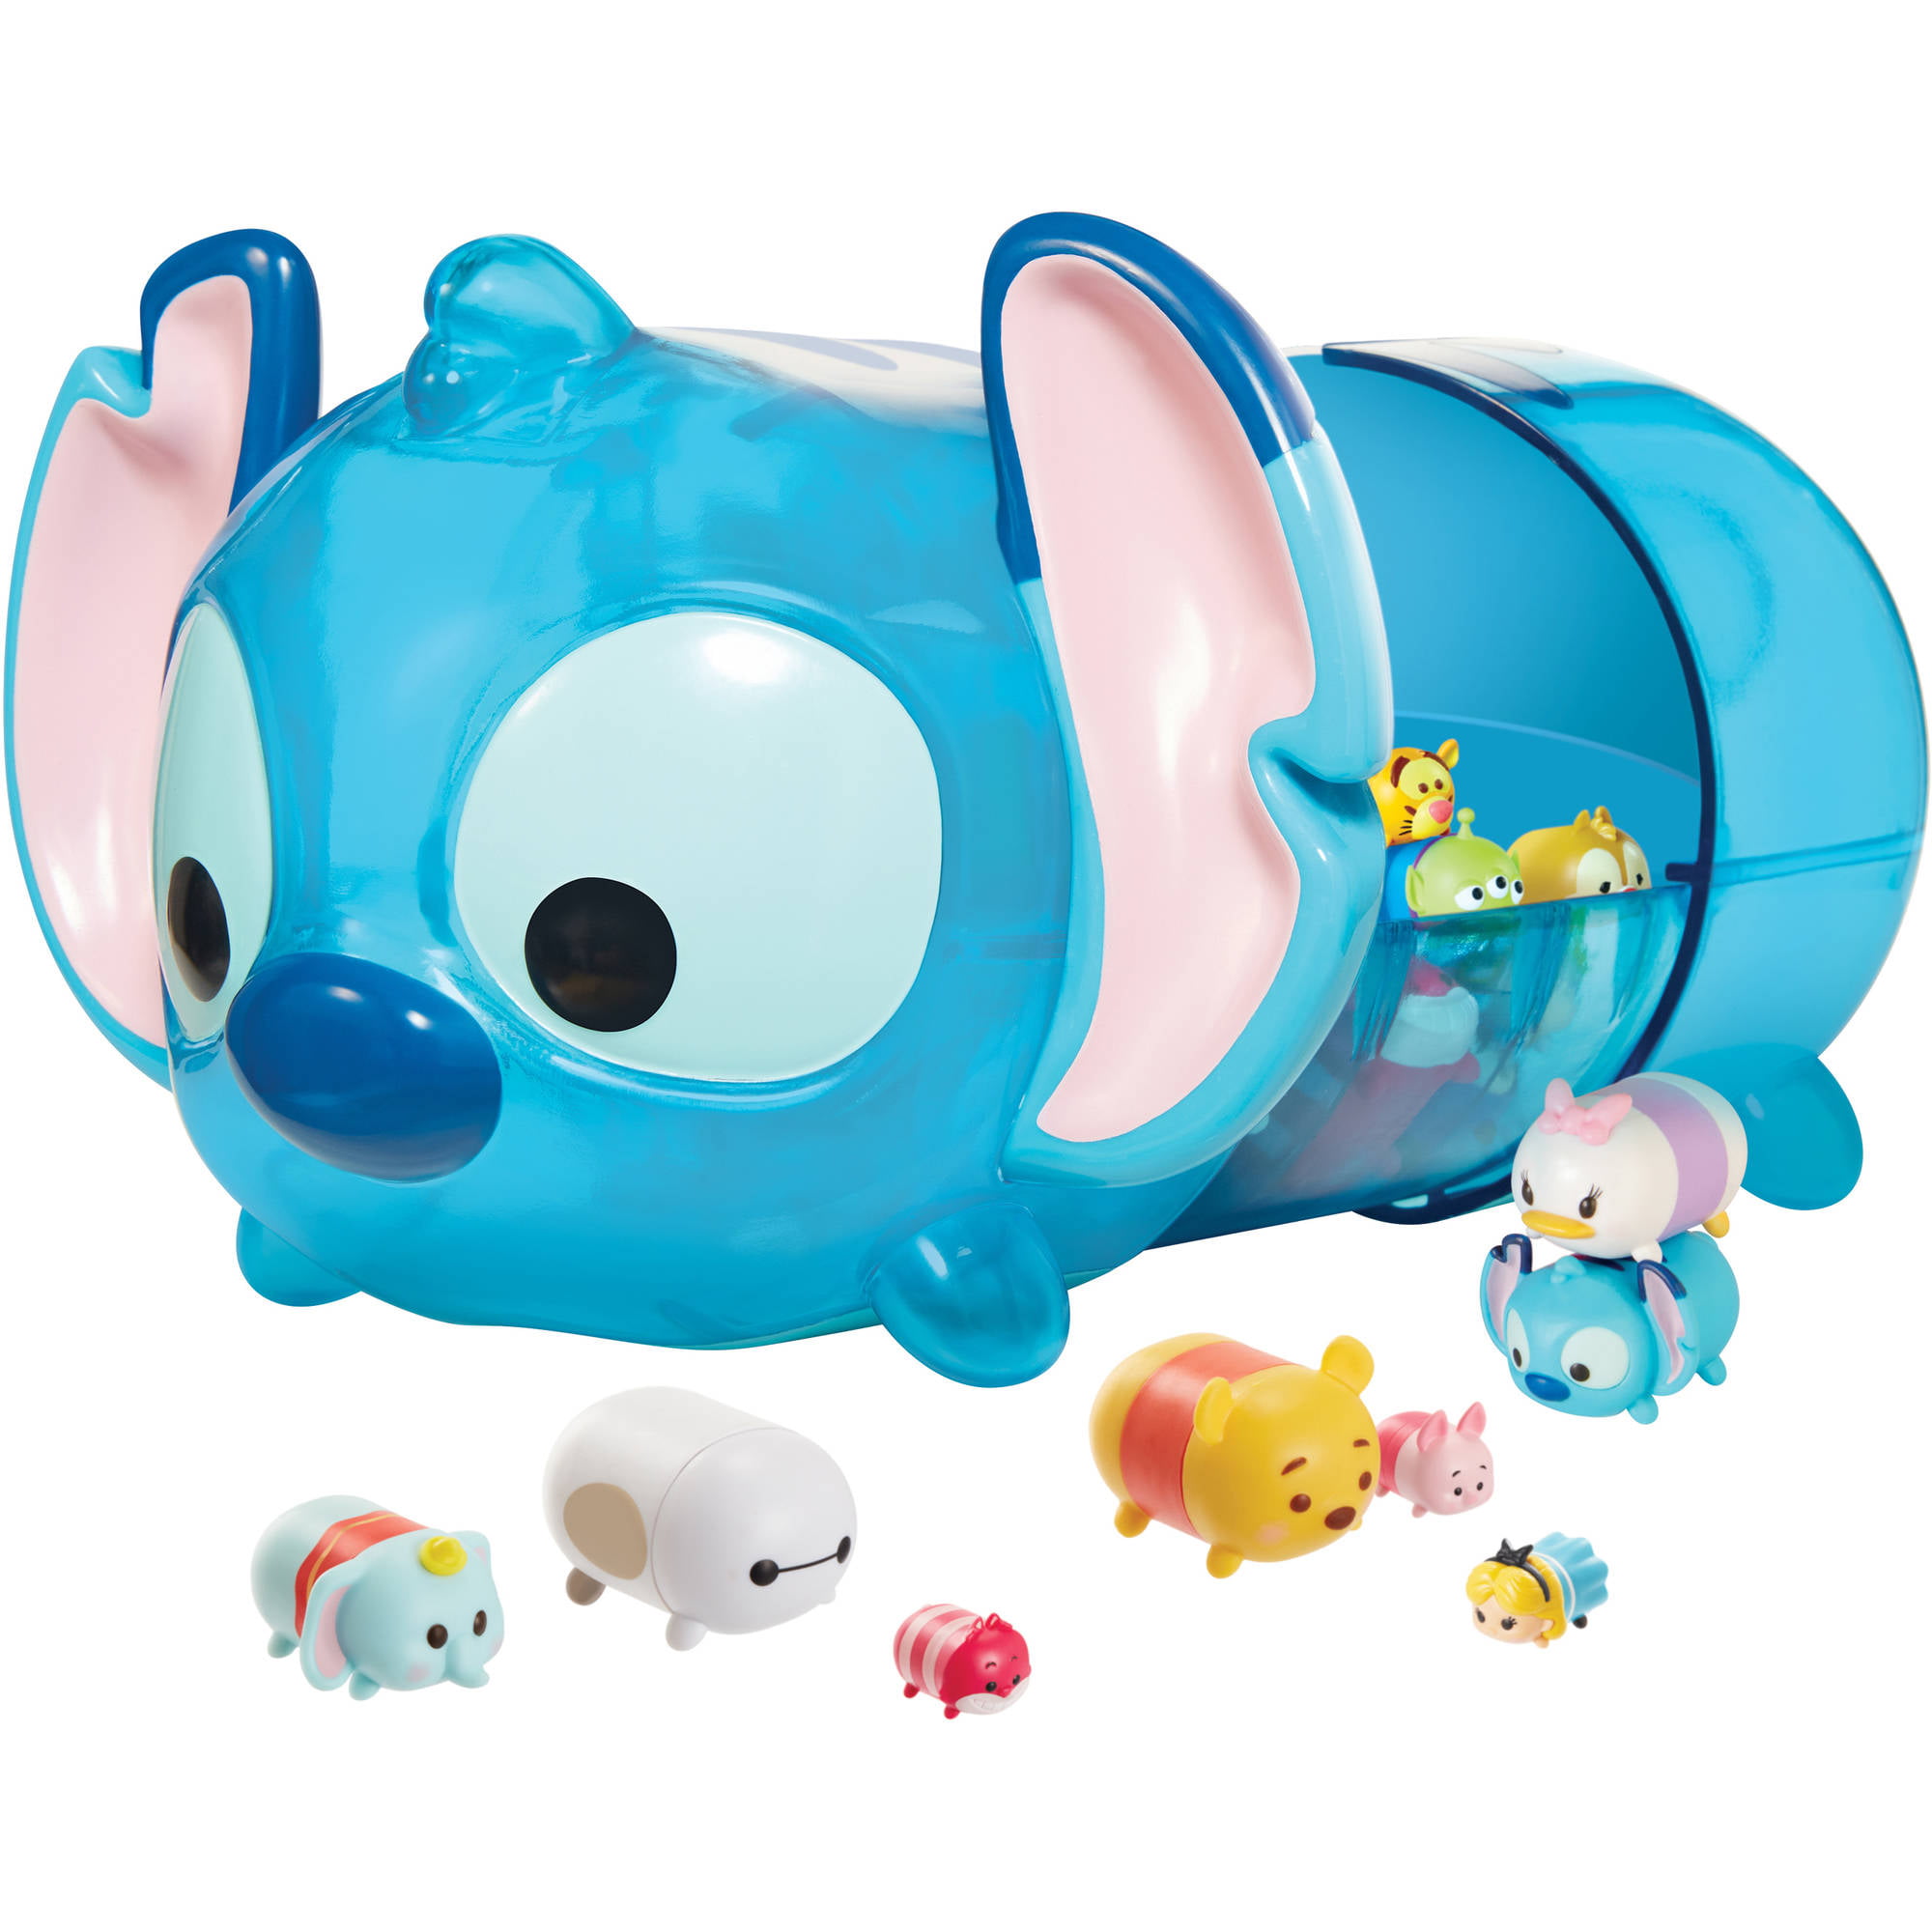 Tsum Tsum Disney Exclusive Stitch Stack 'n Display Set with Exclusive Figure